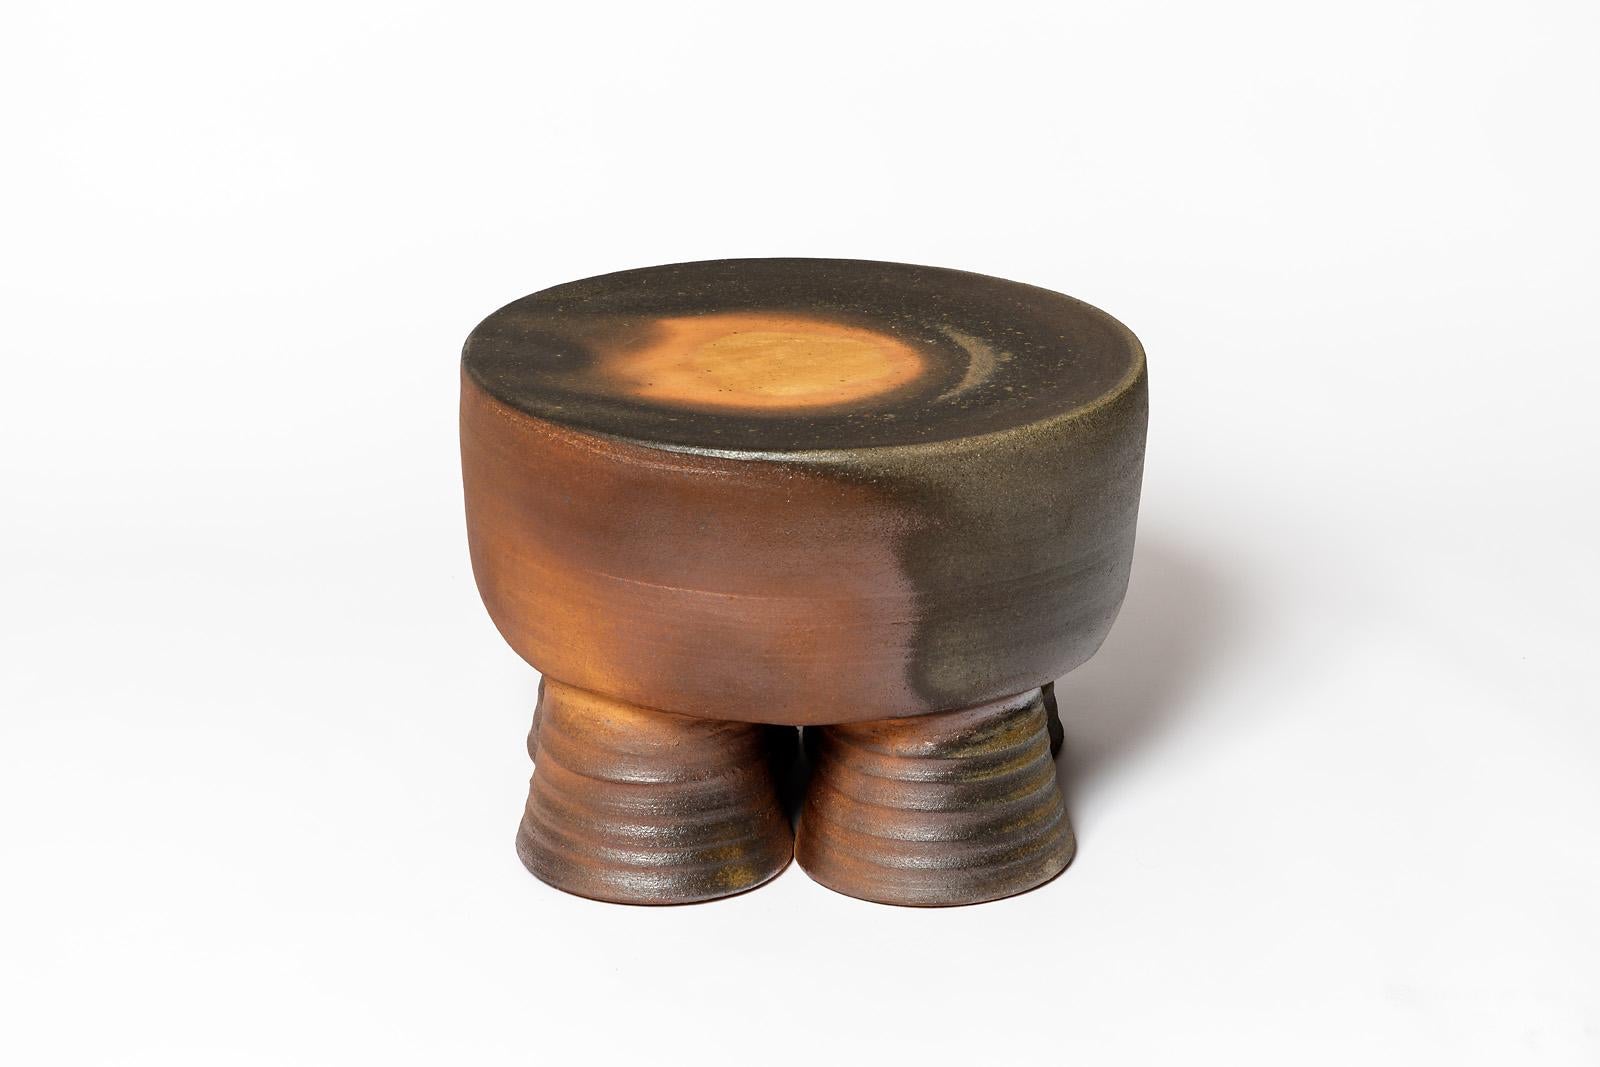 Beaux Arts Wood fired ceramic stool or coffee table by Mia Jensen, 2024. For Sale